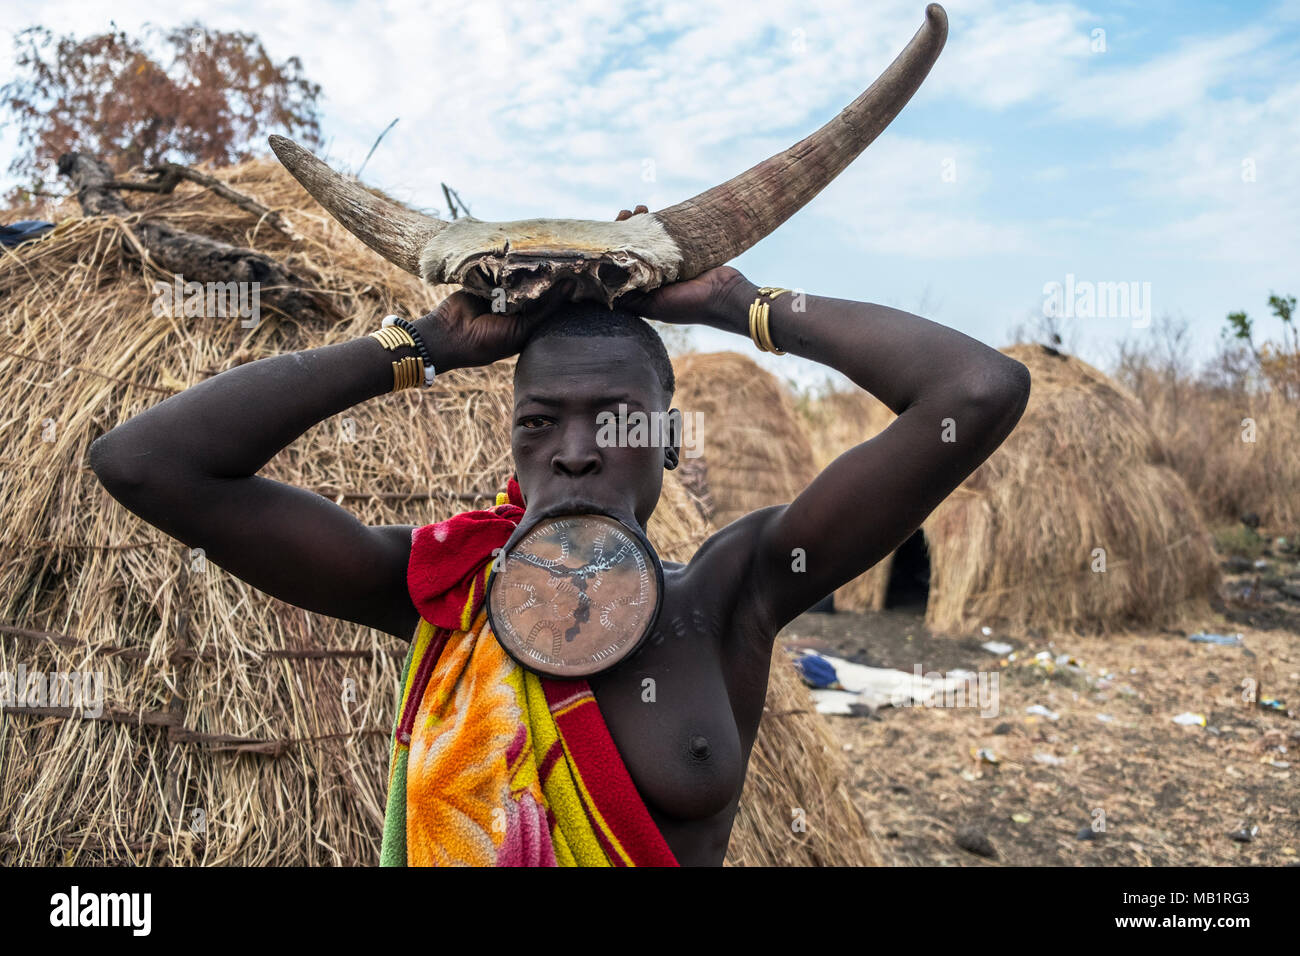 OMORATE, ETHIOPIA - JANUARY 24, 2018: Woman of the Mursi tribe with traditional jewelry with the typical houses of the Mursi in Ethiopia. Stock Photo